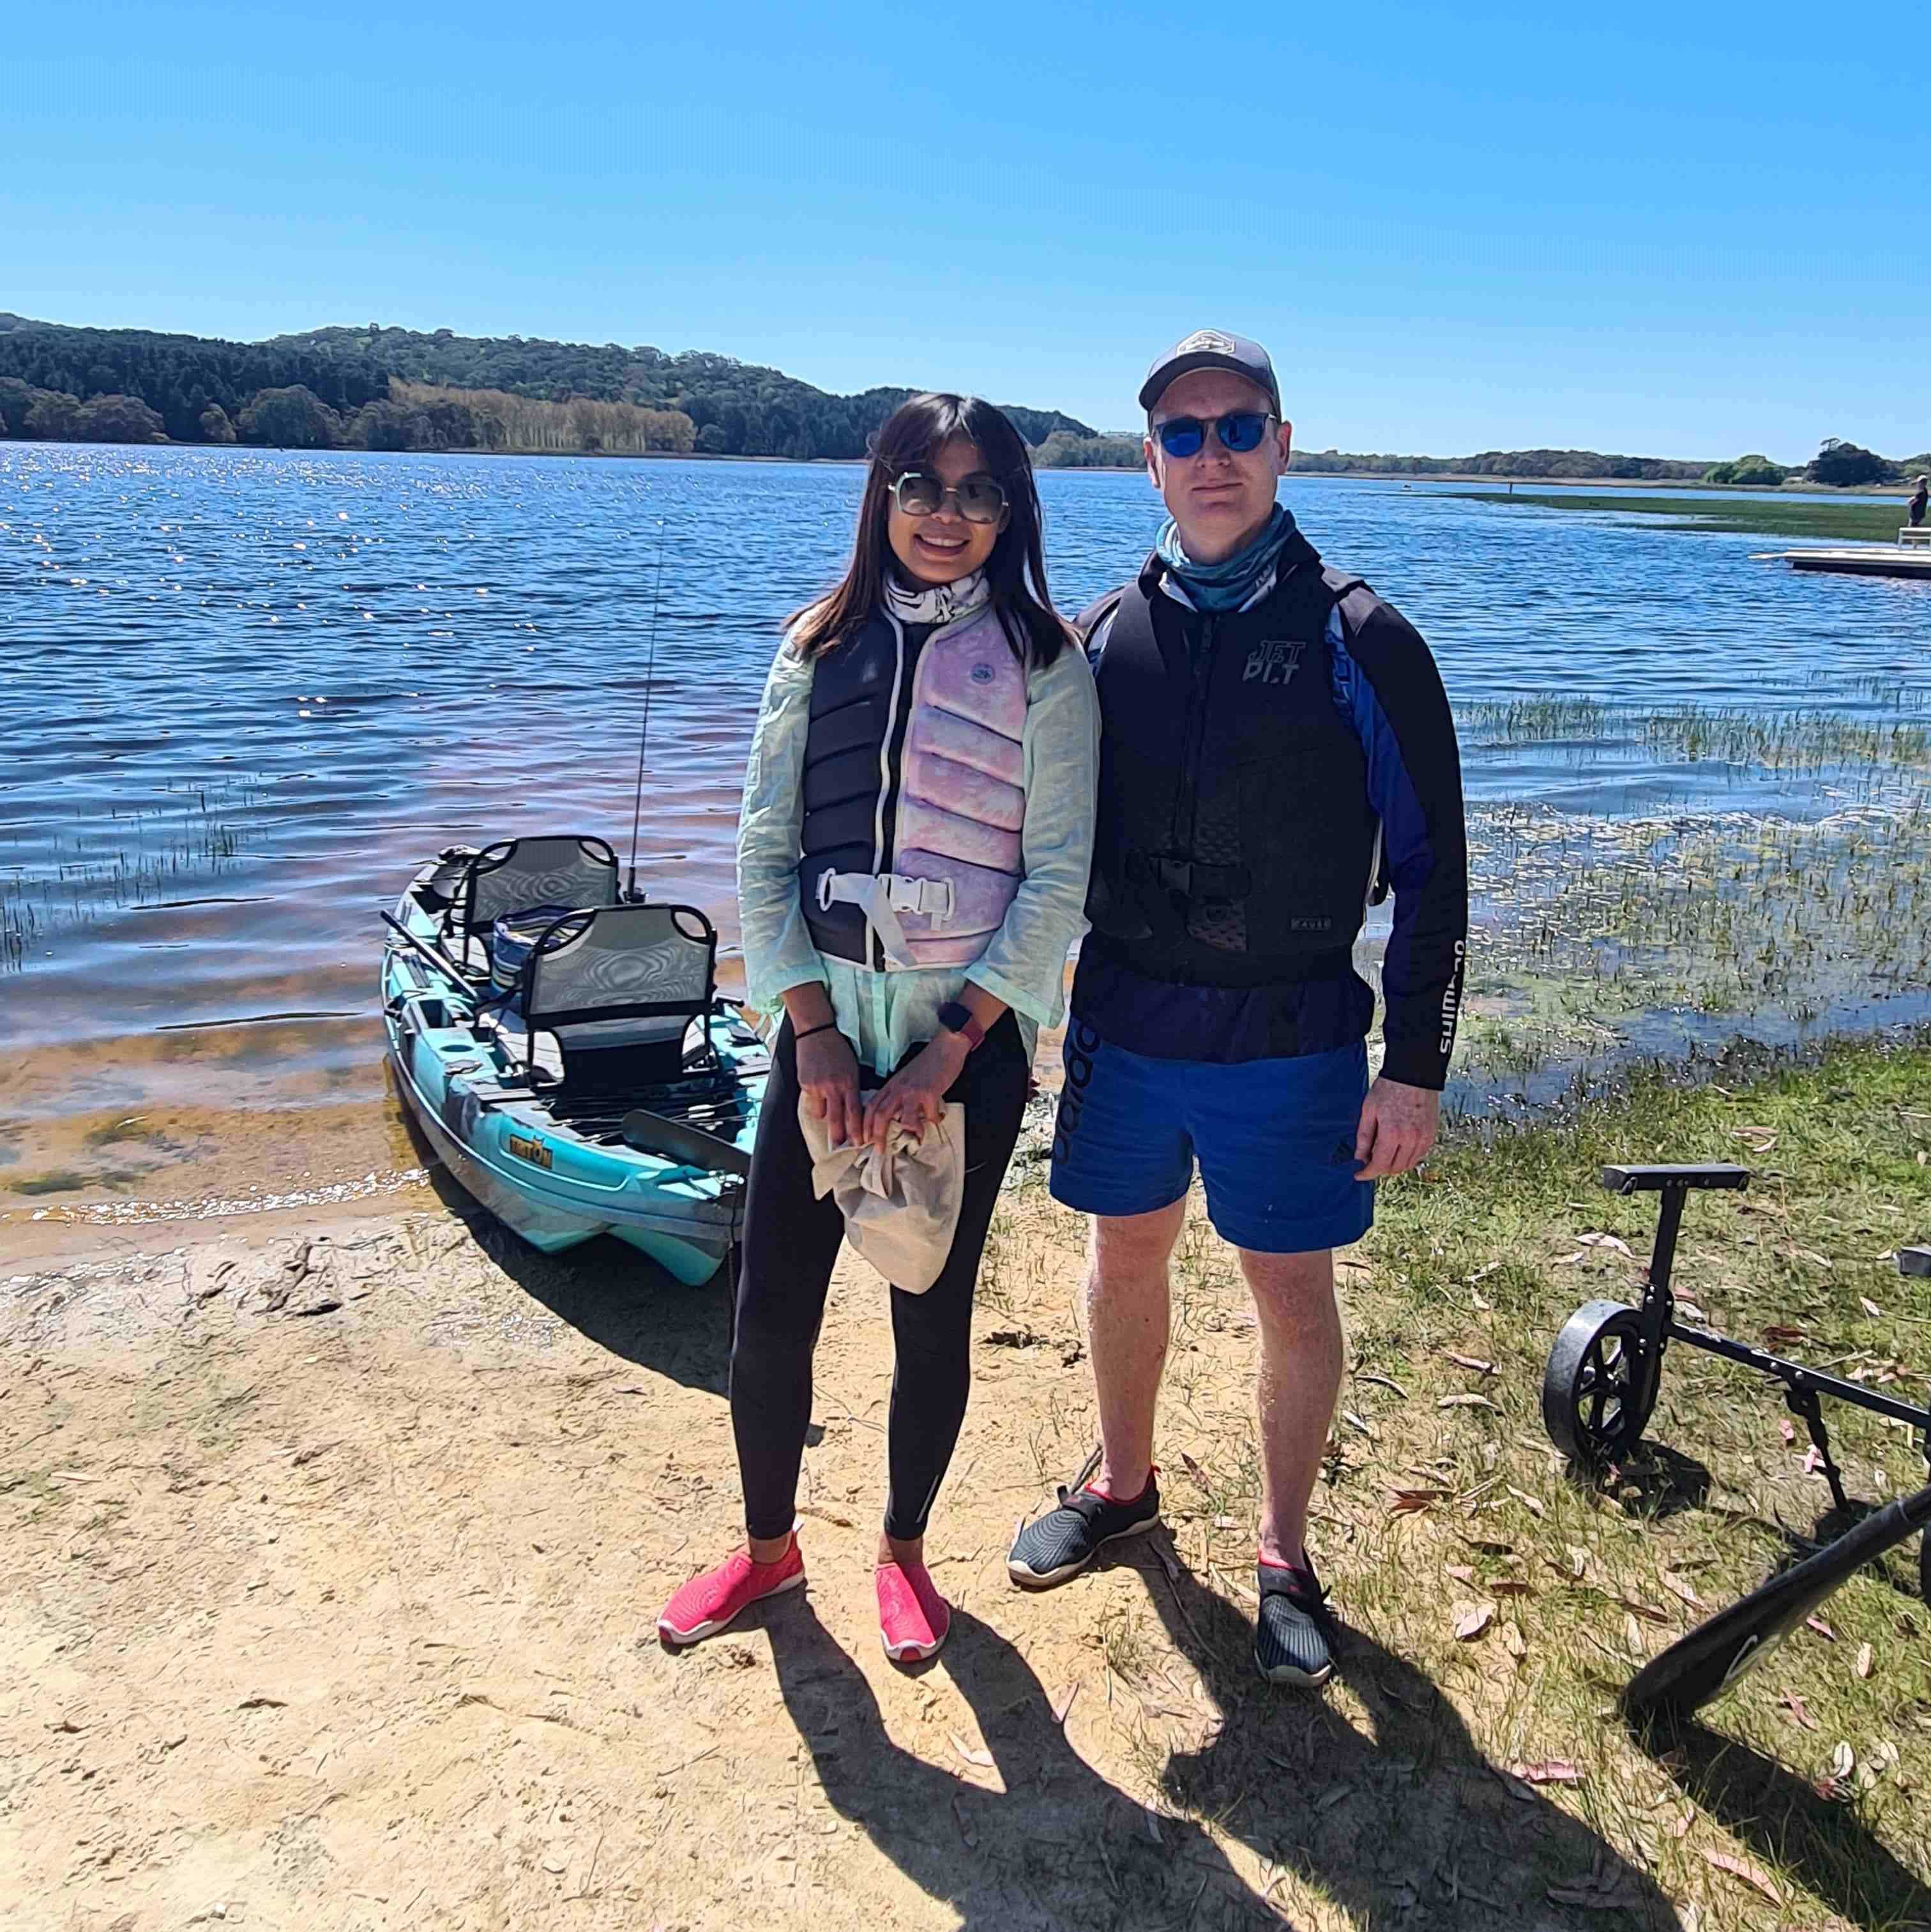 Tow people standing in front of a kayak on the banks of the Myponga Reservoir wearing lifejackets